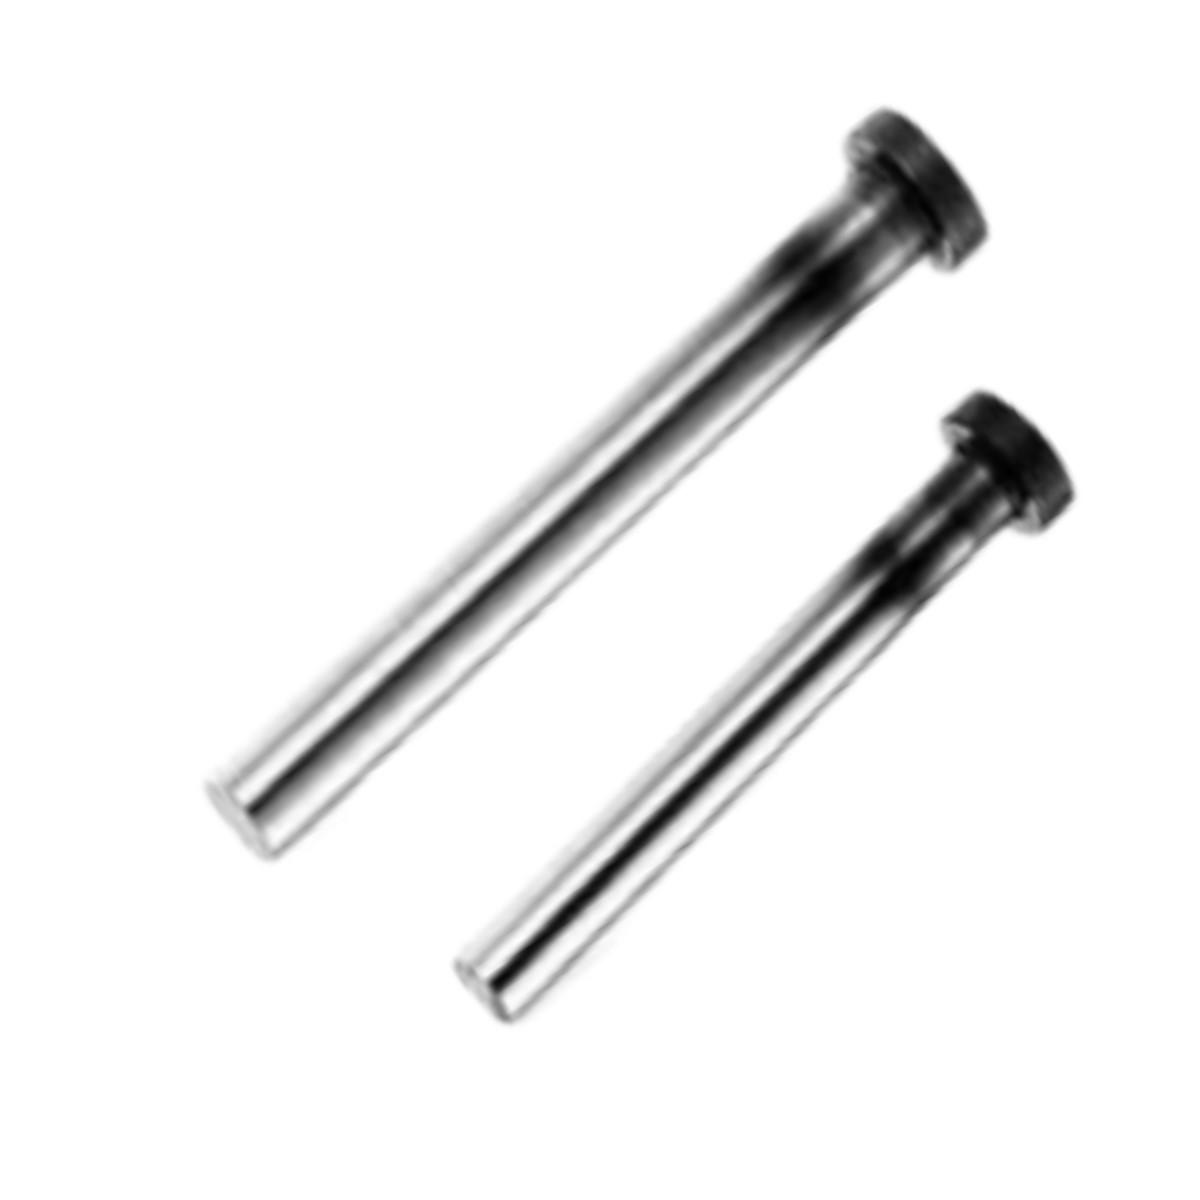 Ejector Pins, DIN 1530, Type AH - Hardened